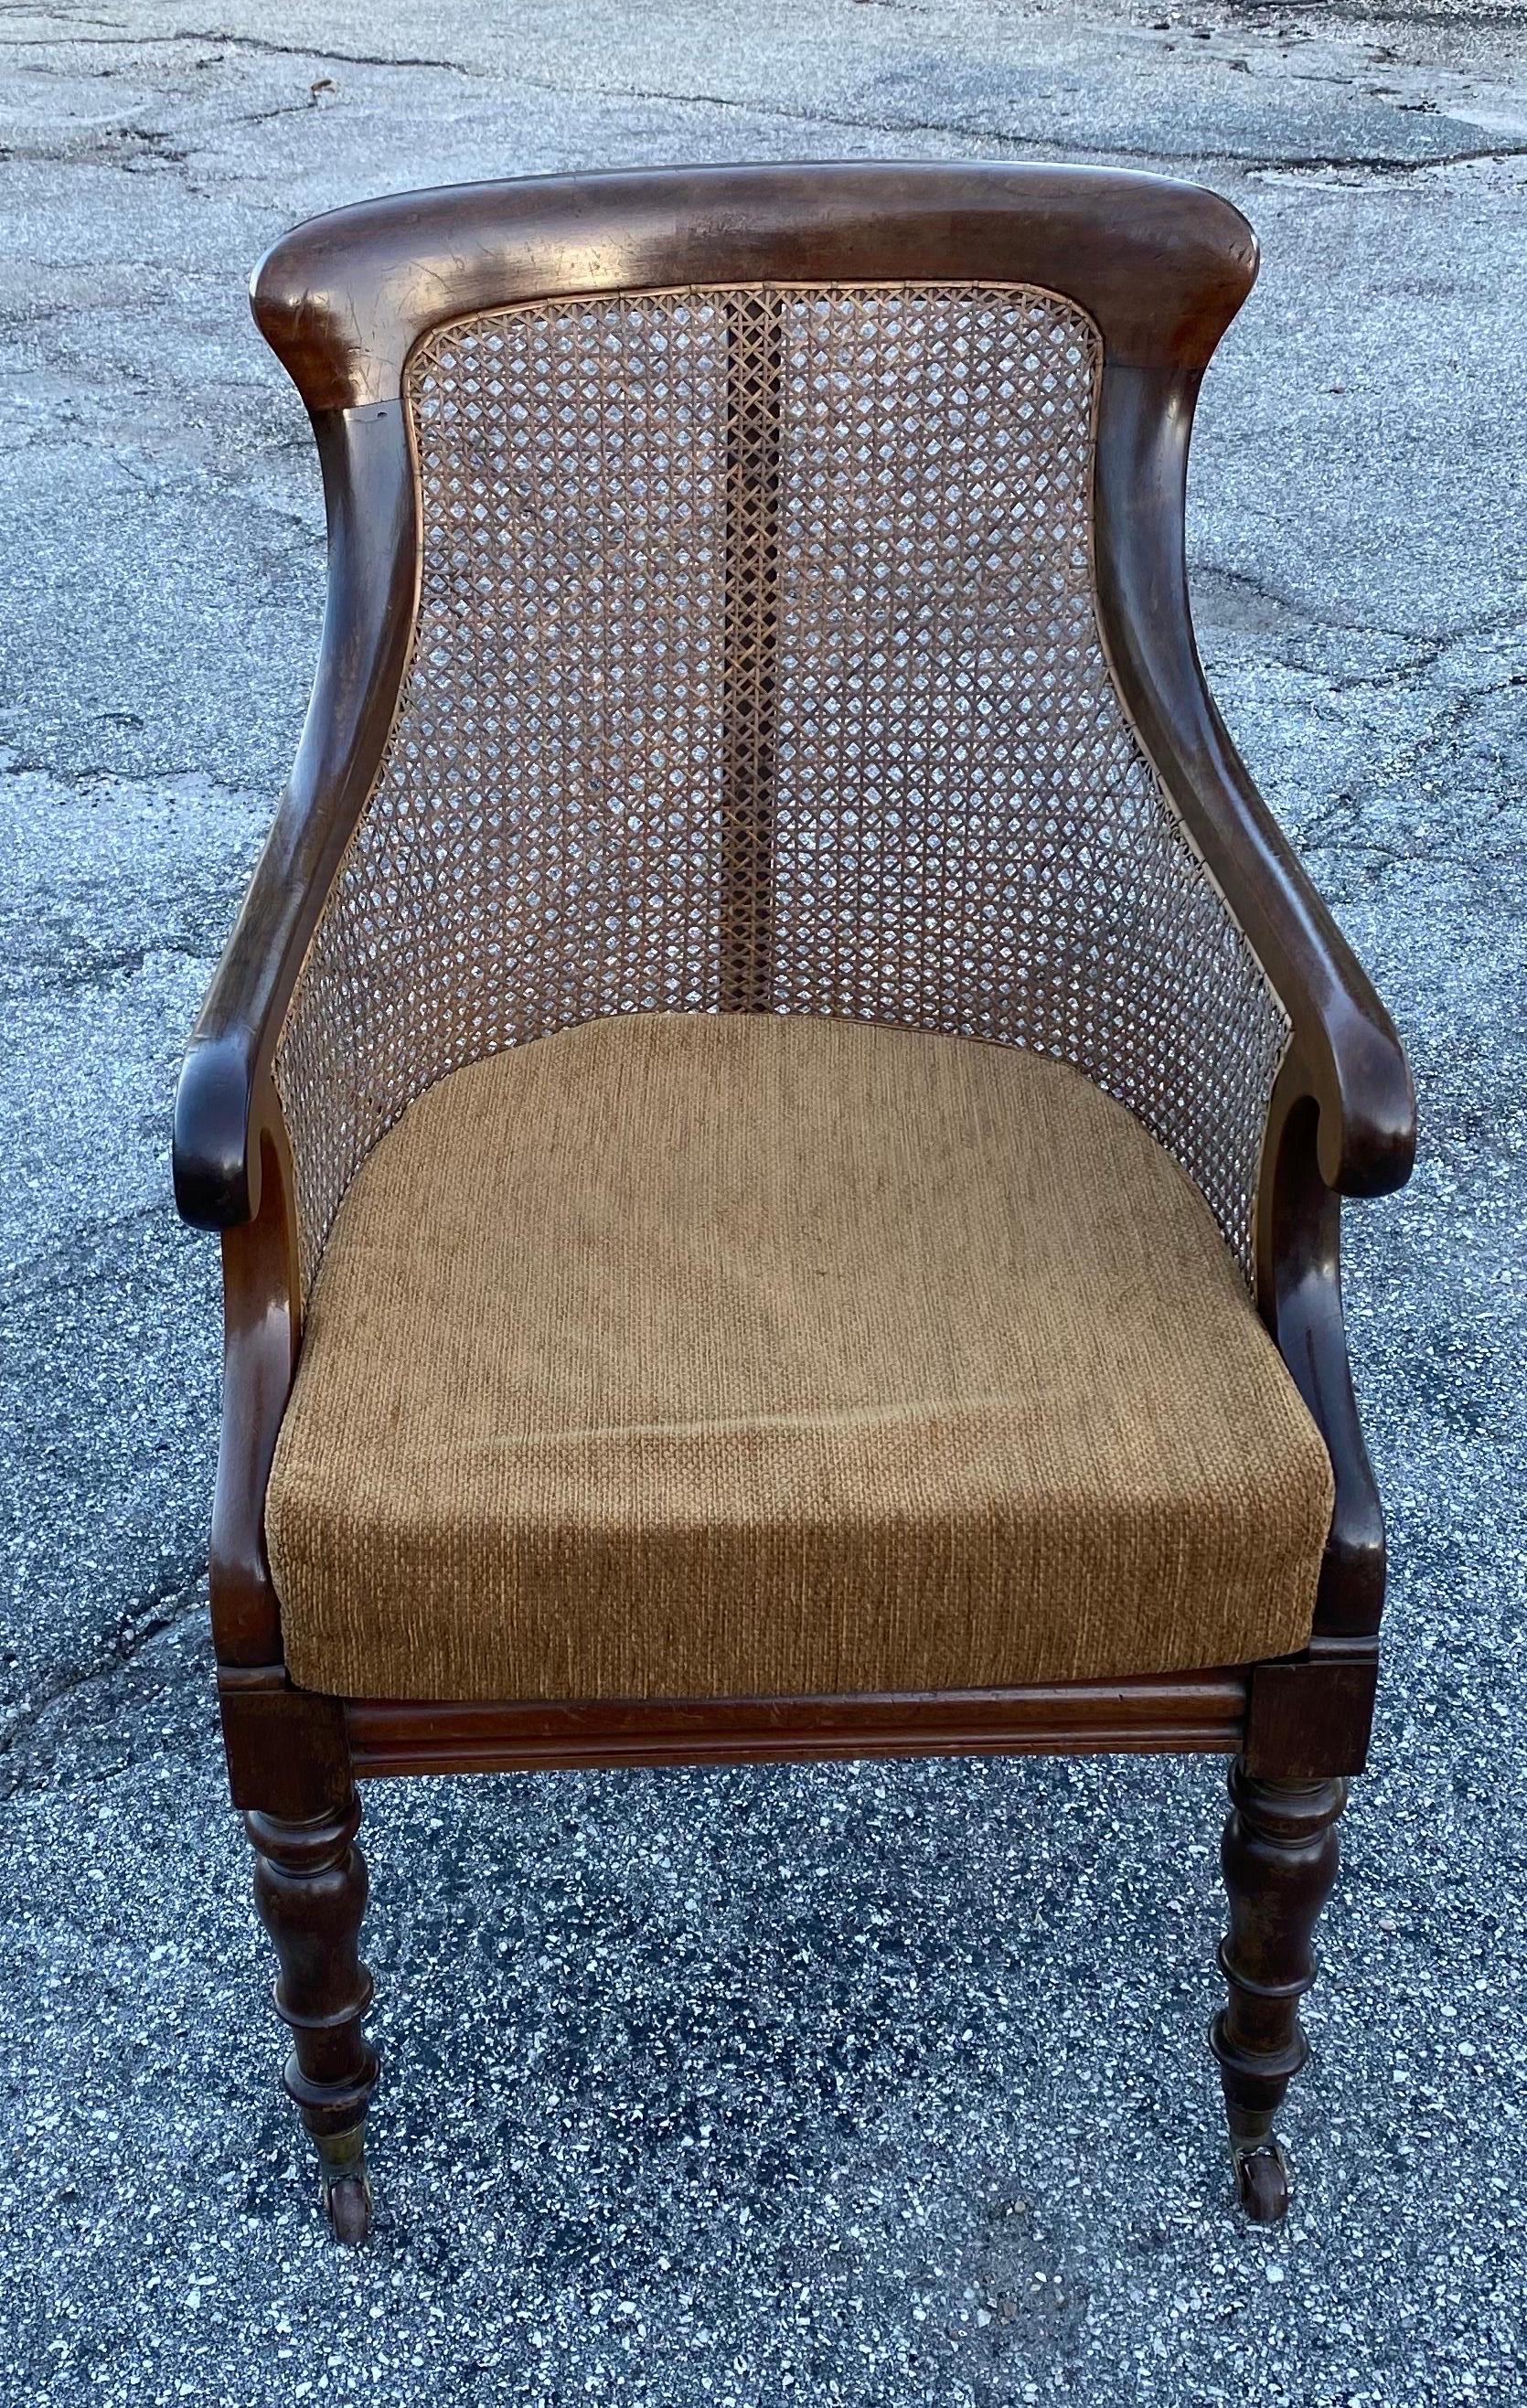 19th century English William IV mahogany library chair with original cane.